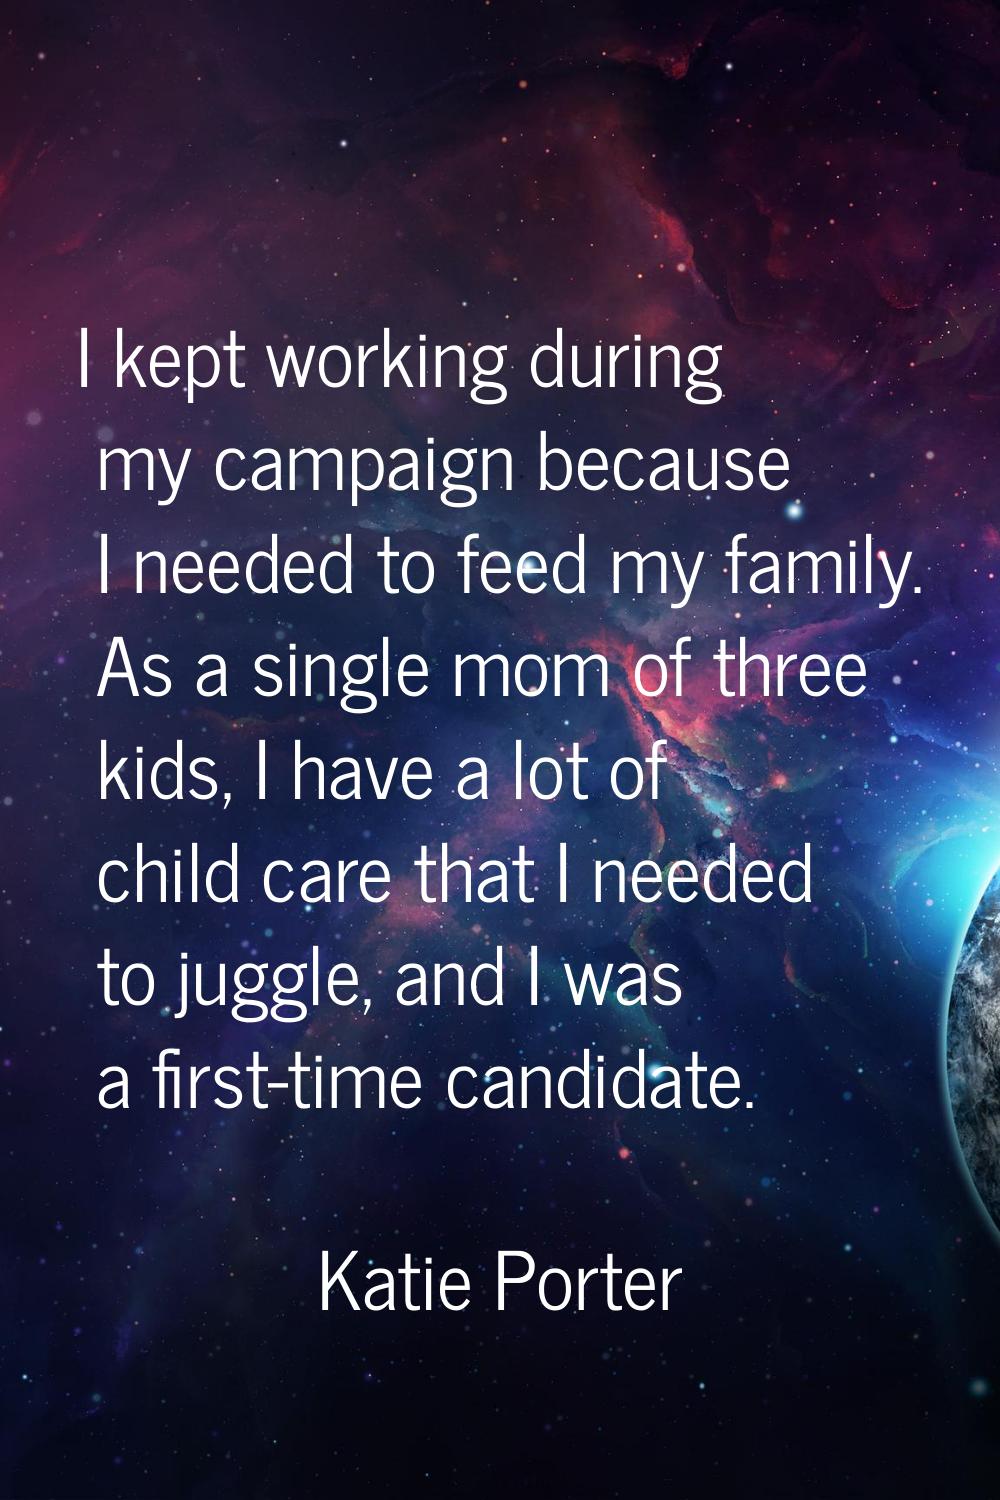 I kept working during my campaign because I needed to feed my family. As a single mom of three kids